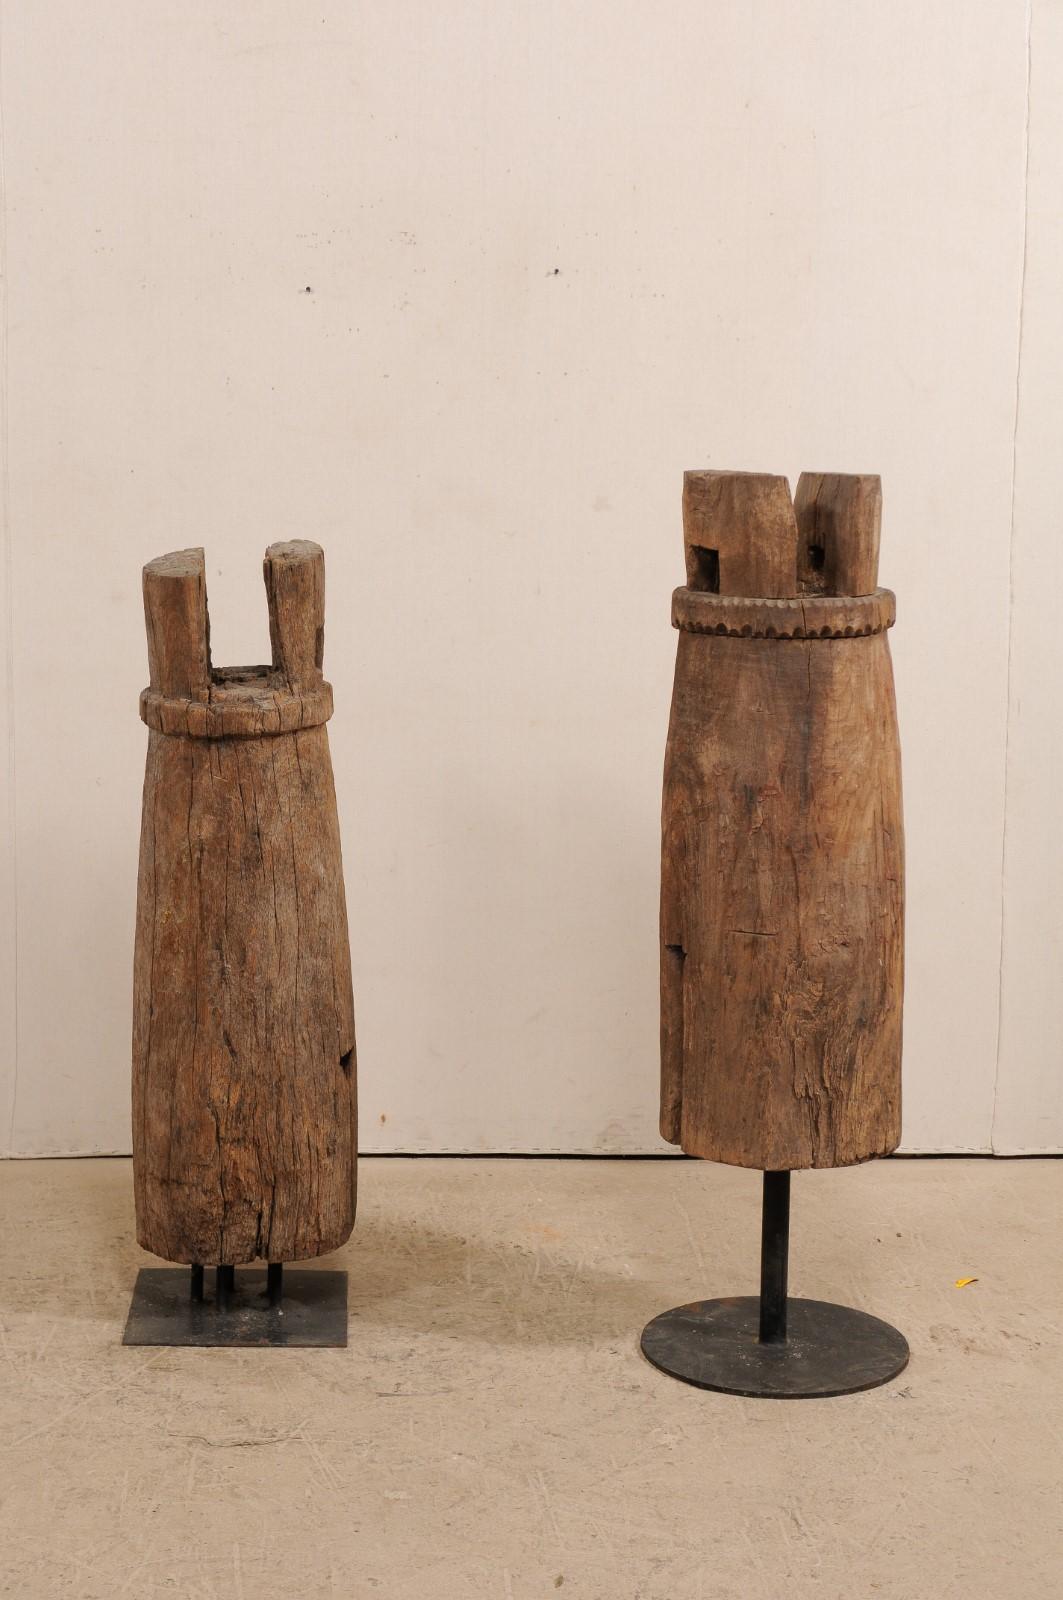 Rustic Pair of Hand-Carved Thai Wooden Temple Bells on Stands, Early 20th Century For Sale